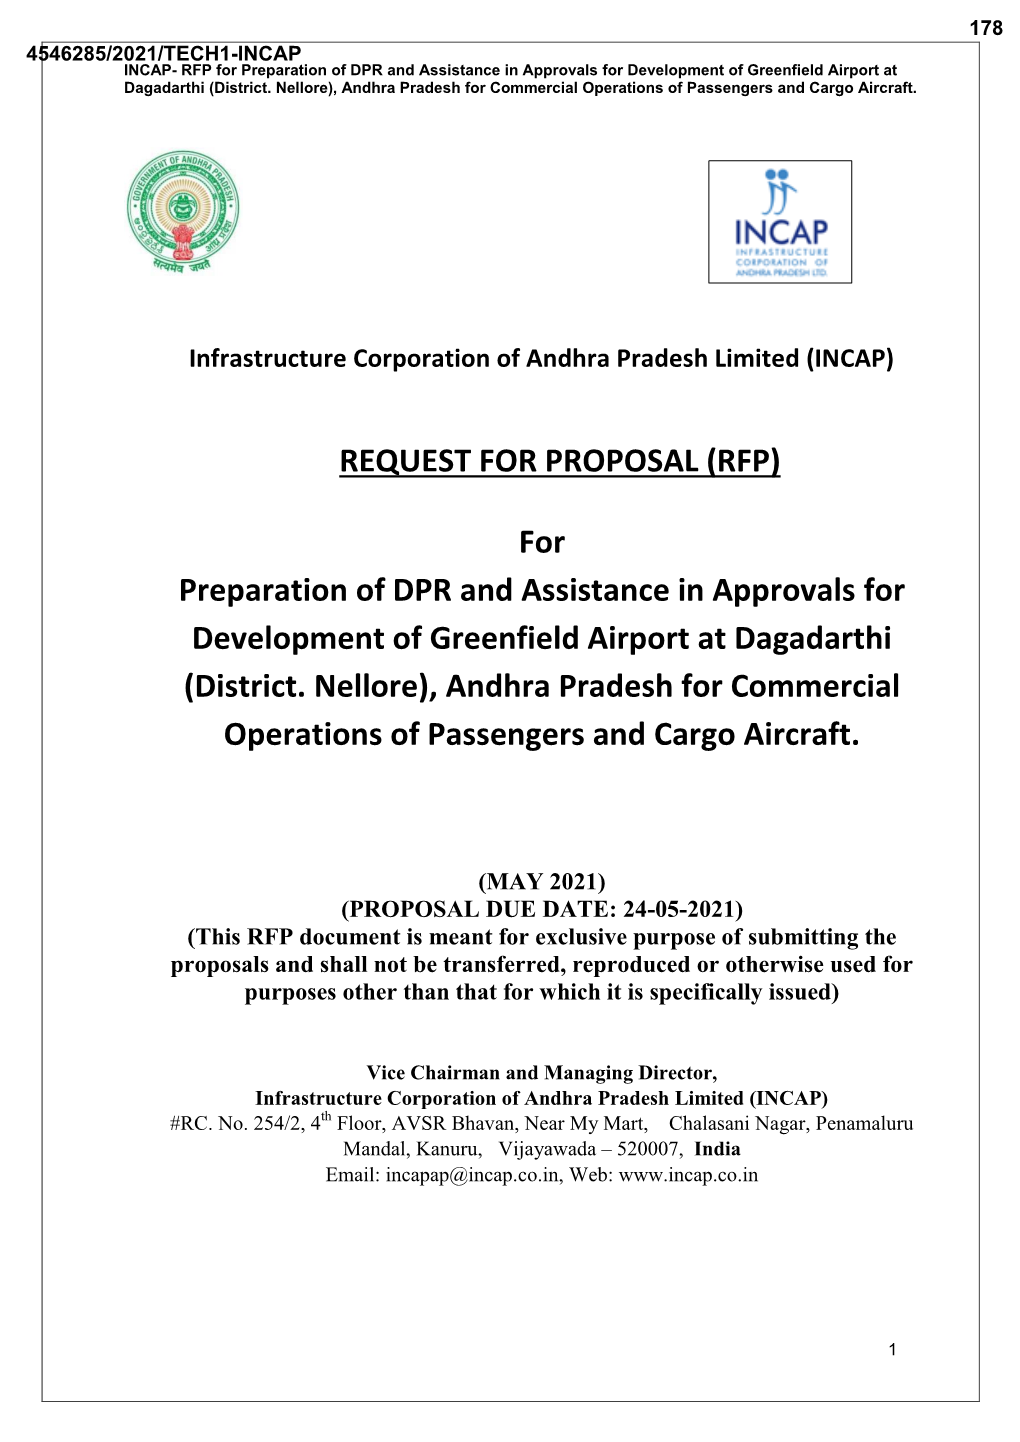 Rfp for Preparation of DPR for Development of Greenfield Airport